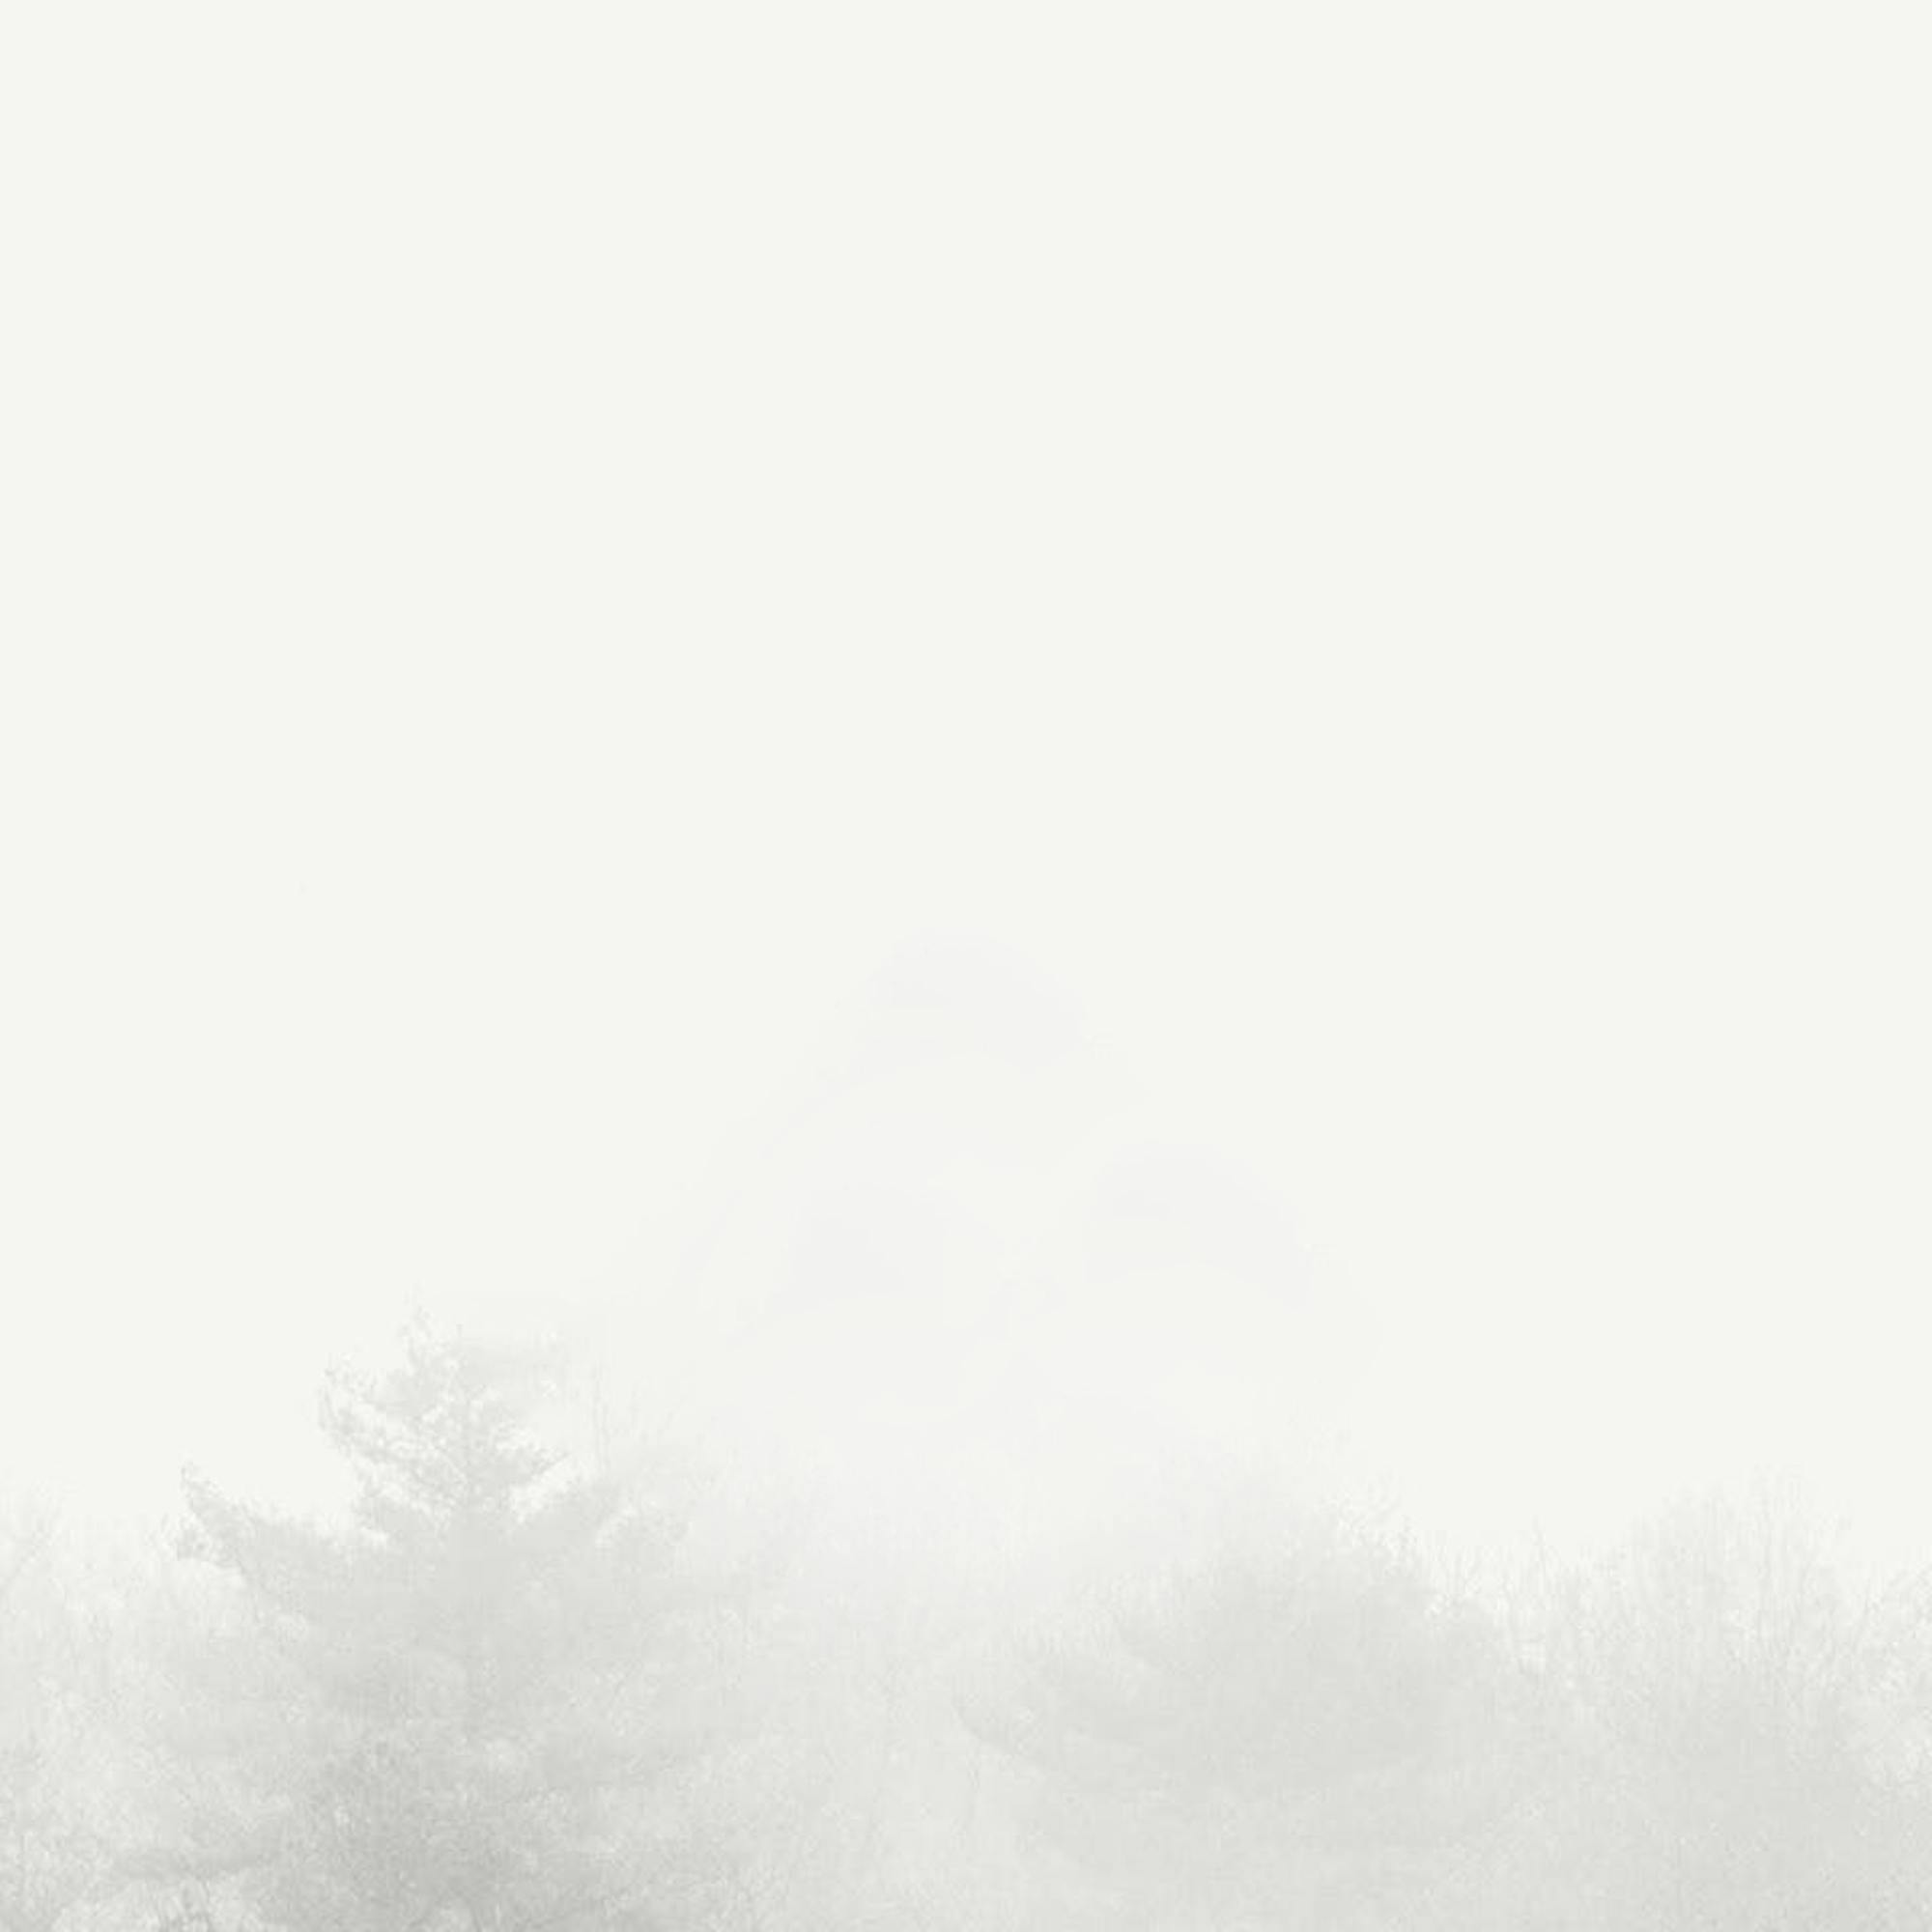 Backgound image of trees in fog. 